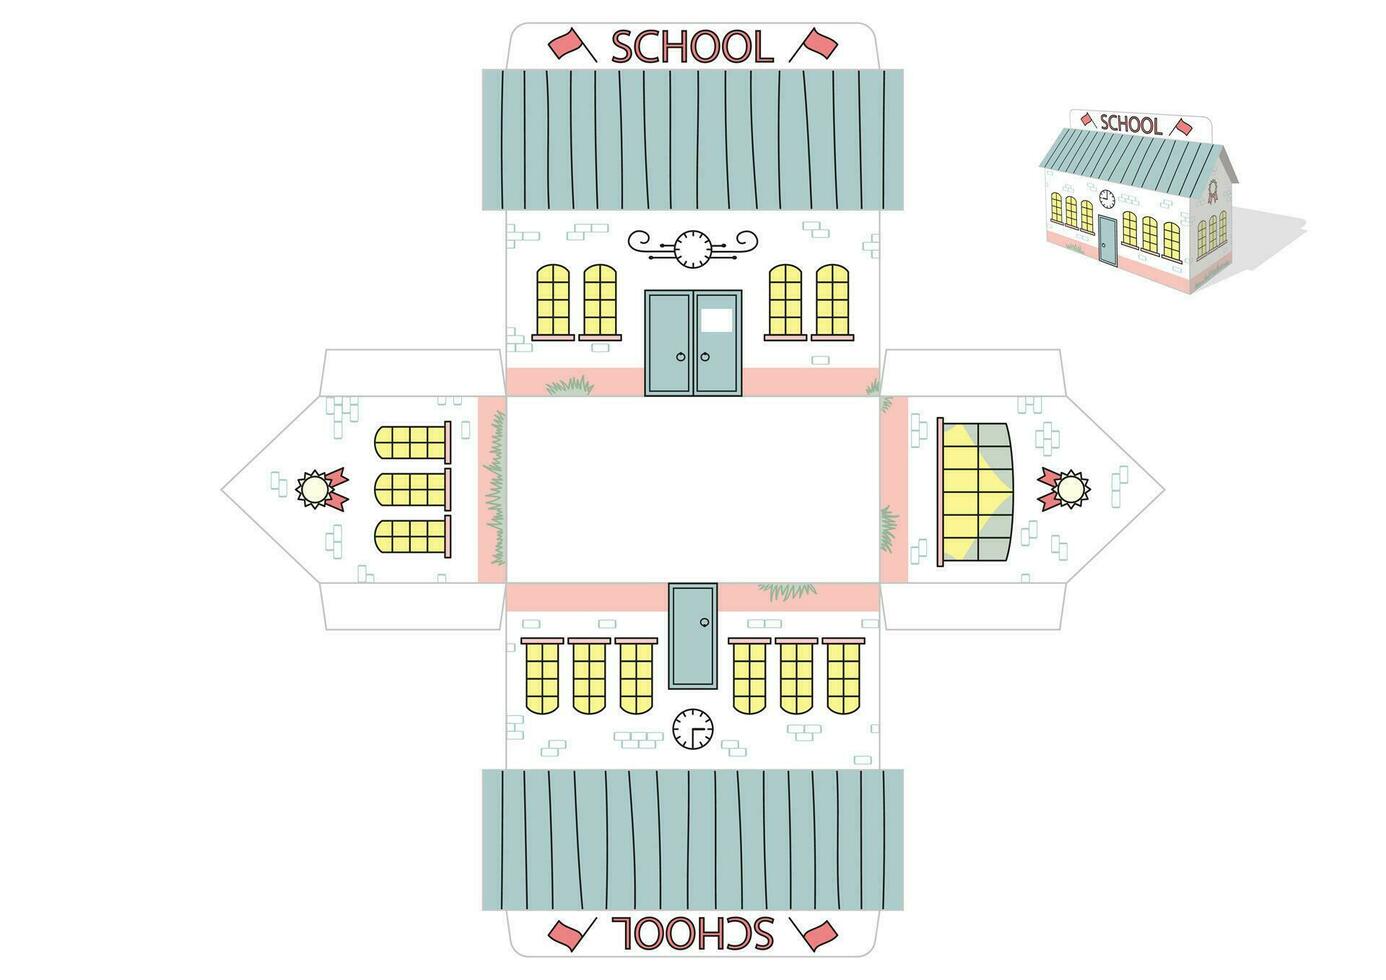 Make your own toy school building cut and glue paper craft model. Children art game. Vector illustration